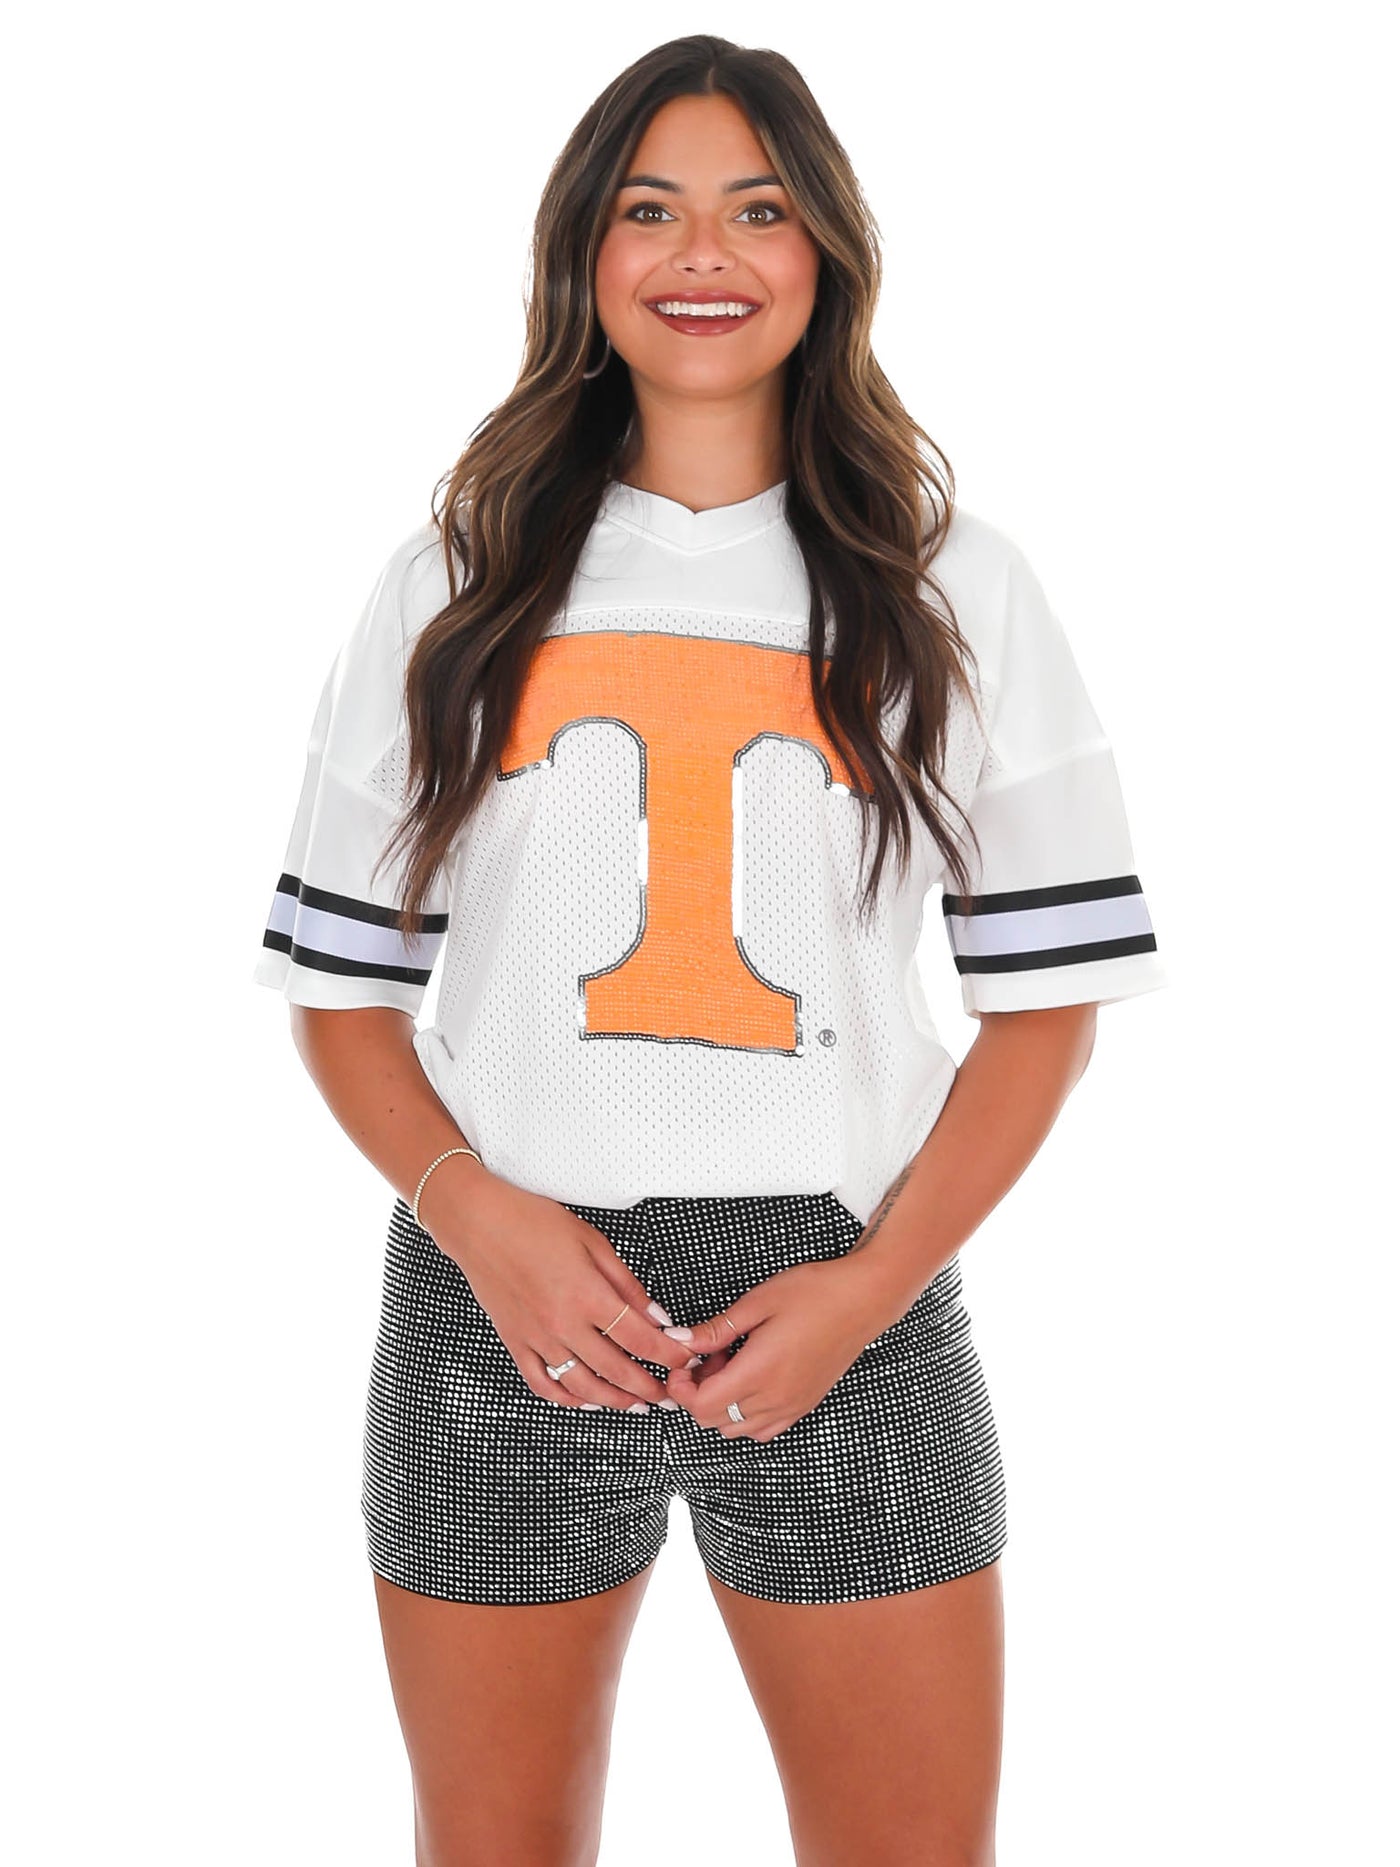 Tennessee Volunteers Rookie Move Oversized Jersey